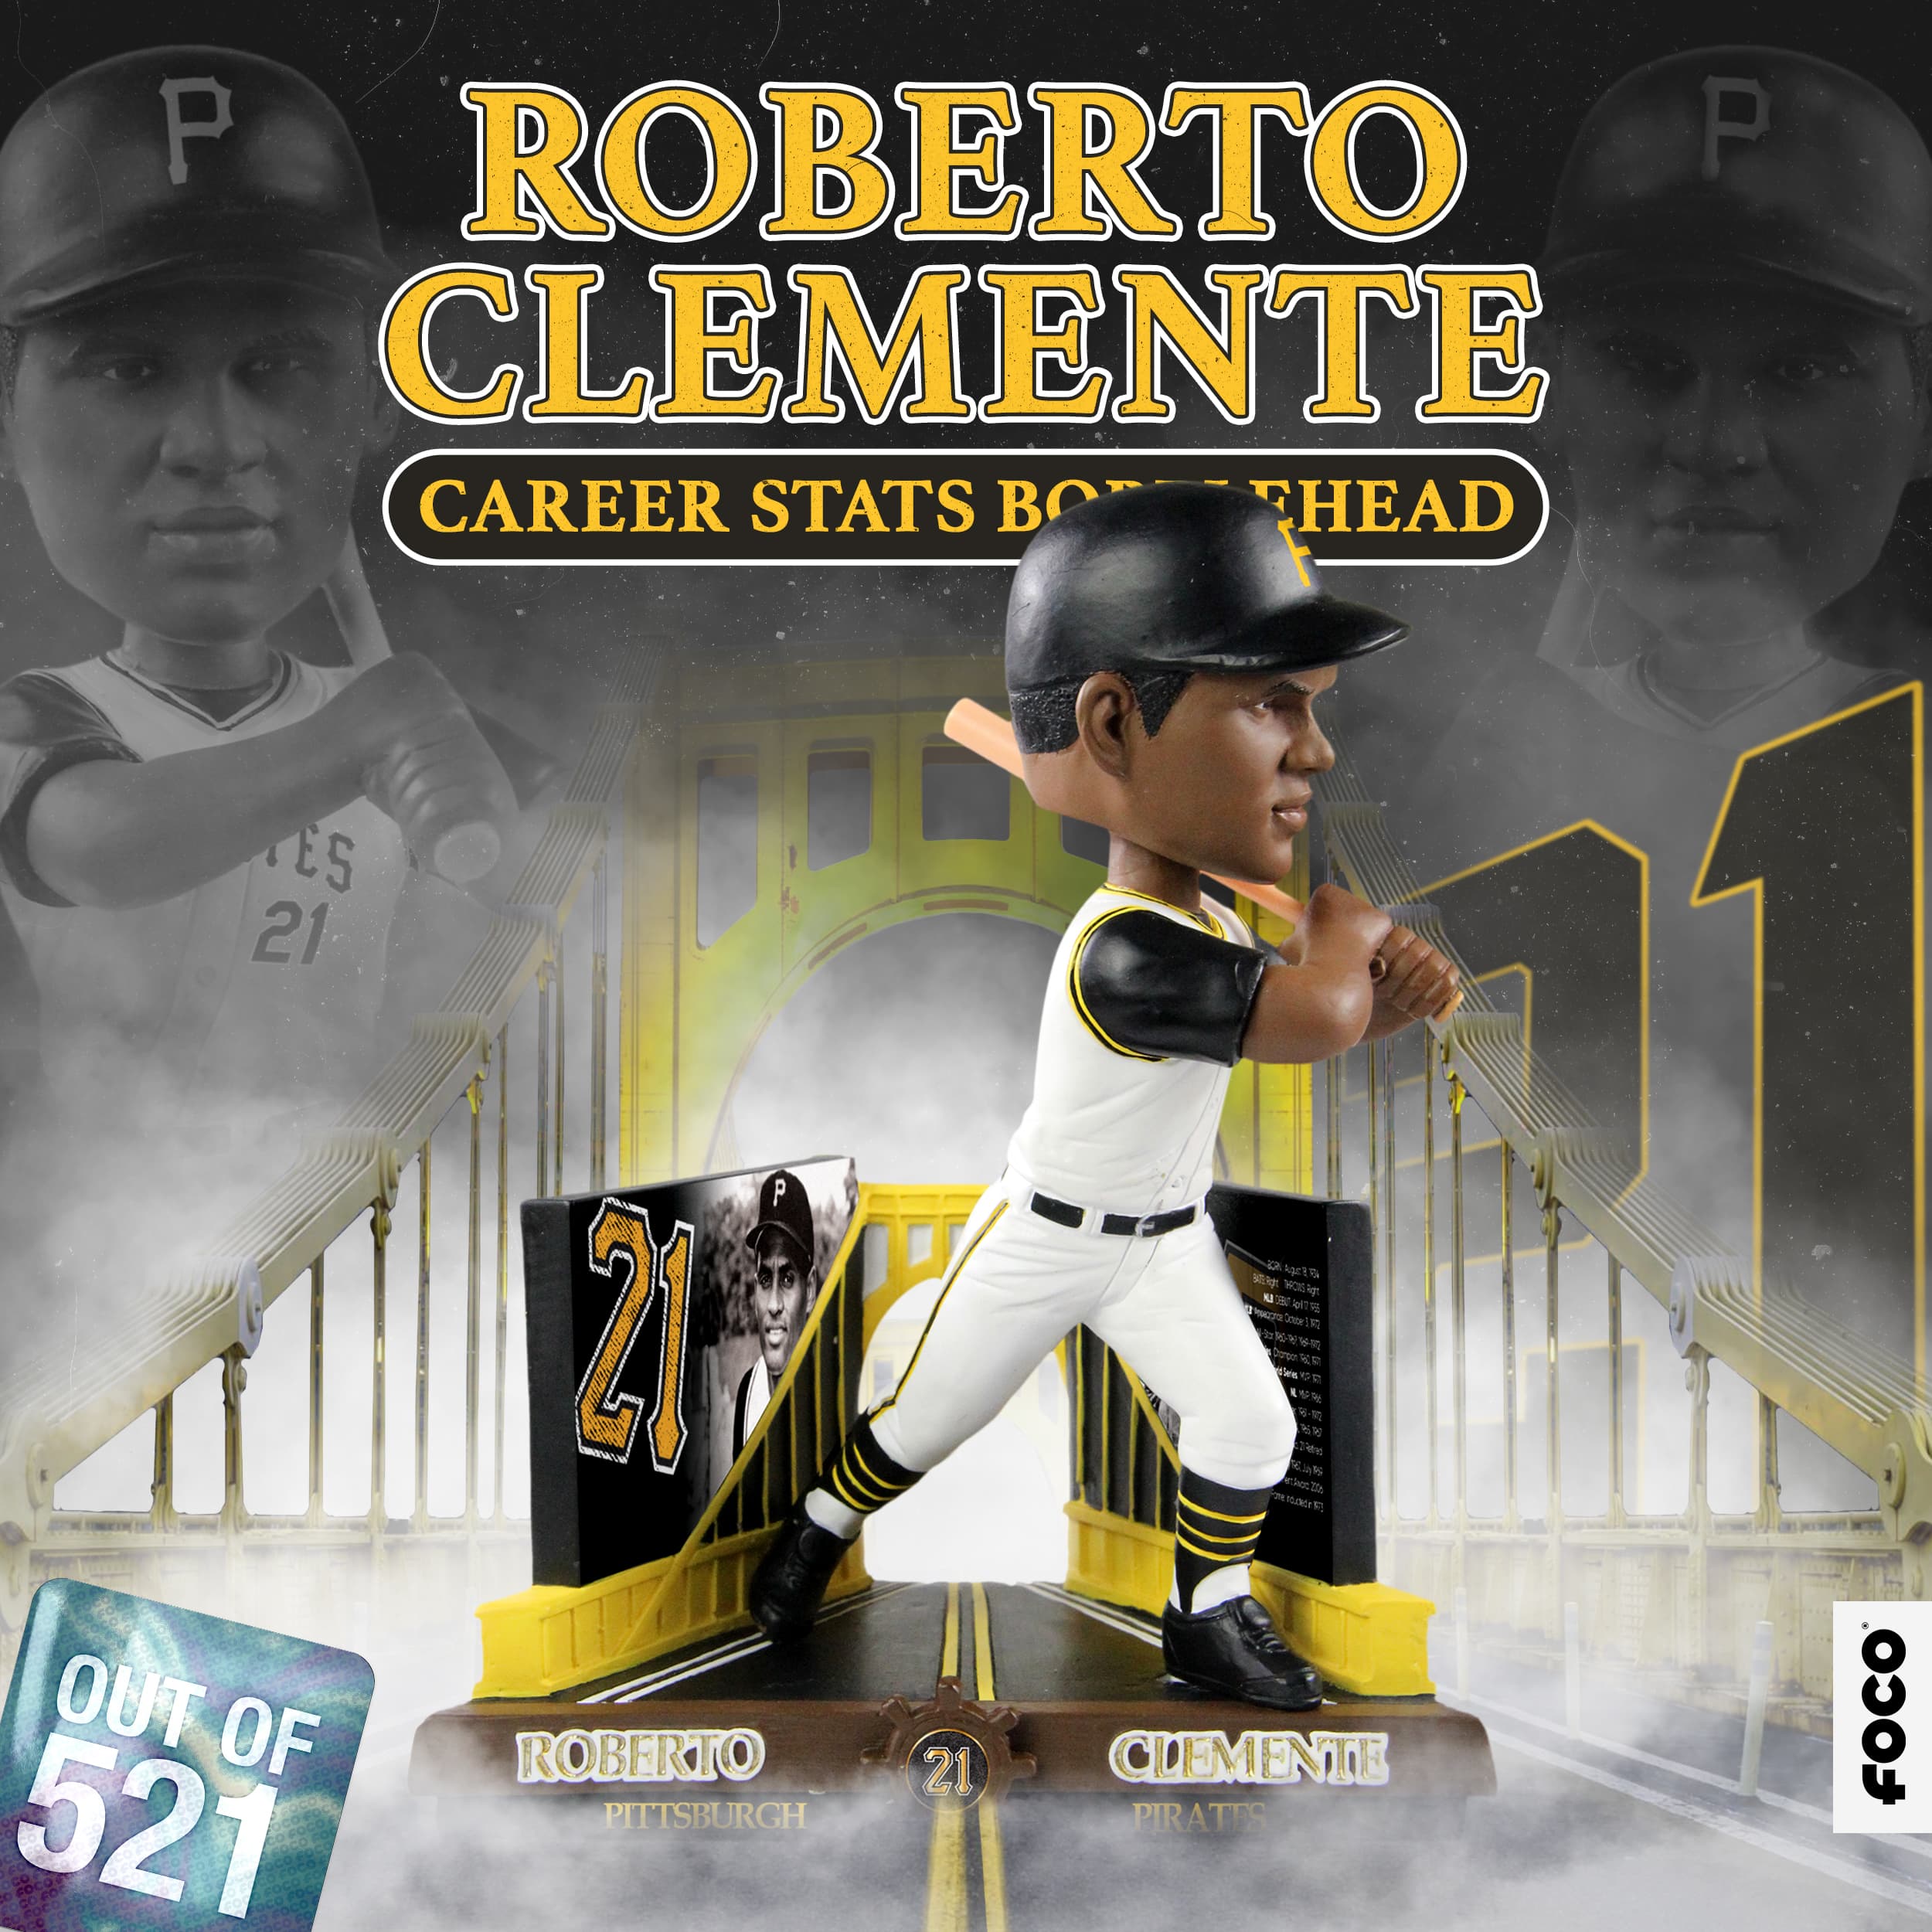 New FOCO bobblehead features legendary Pittsburgh Pirate Roberto Clemente 